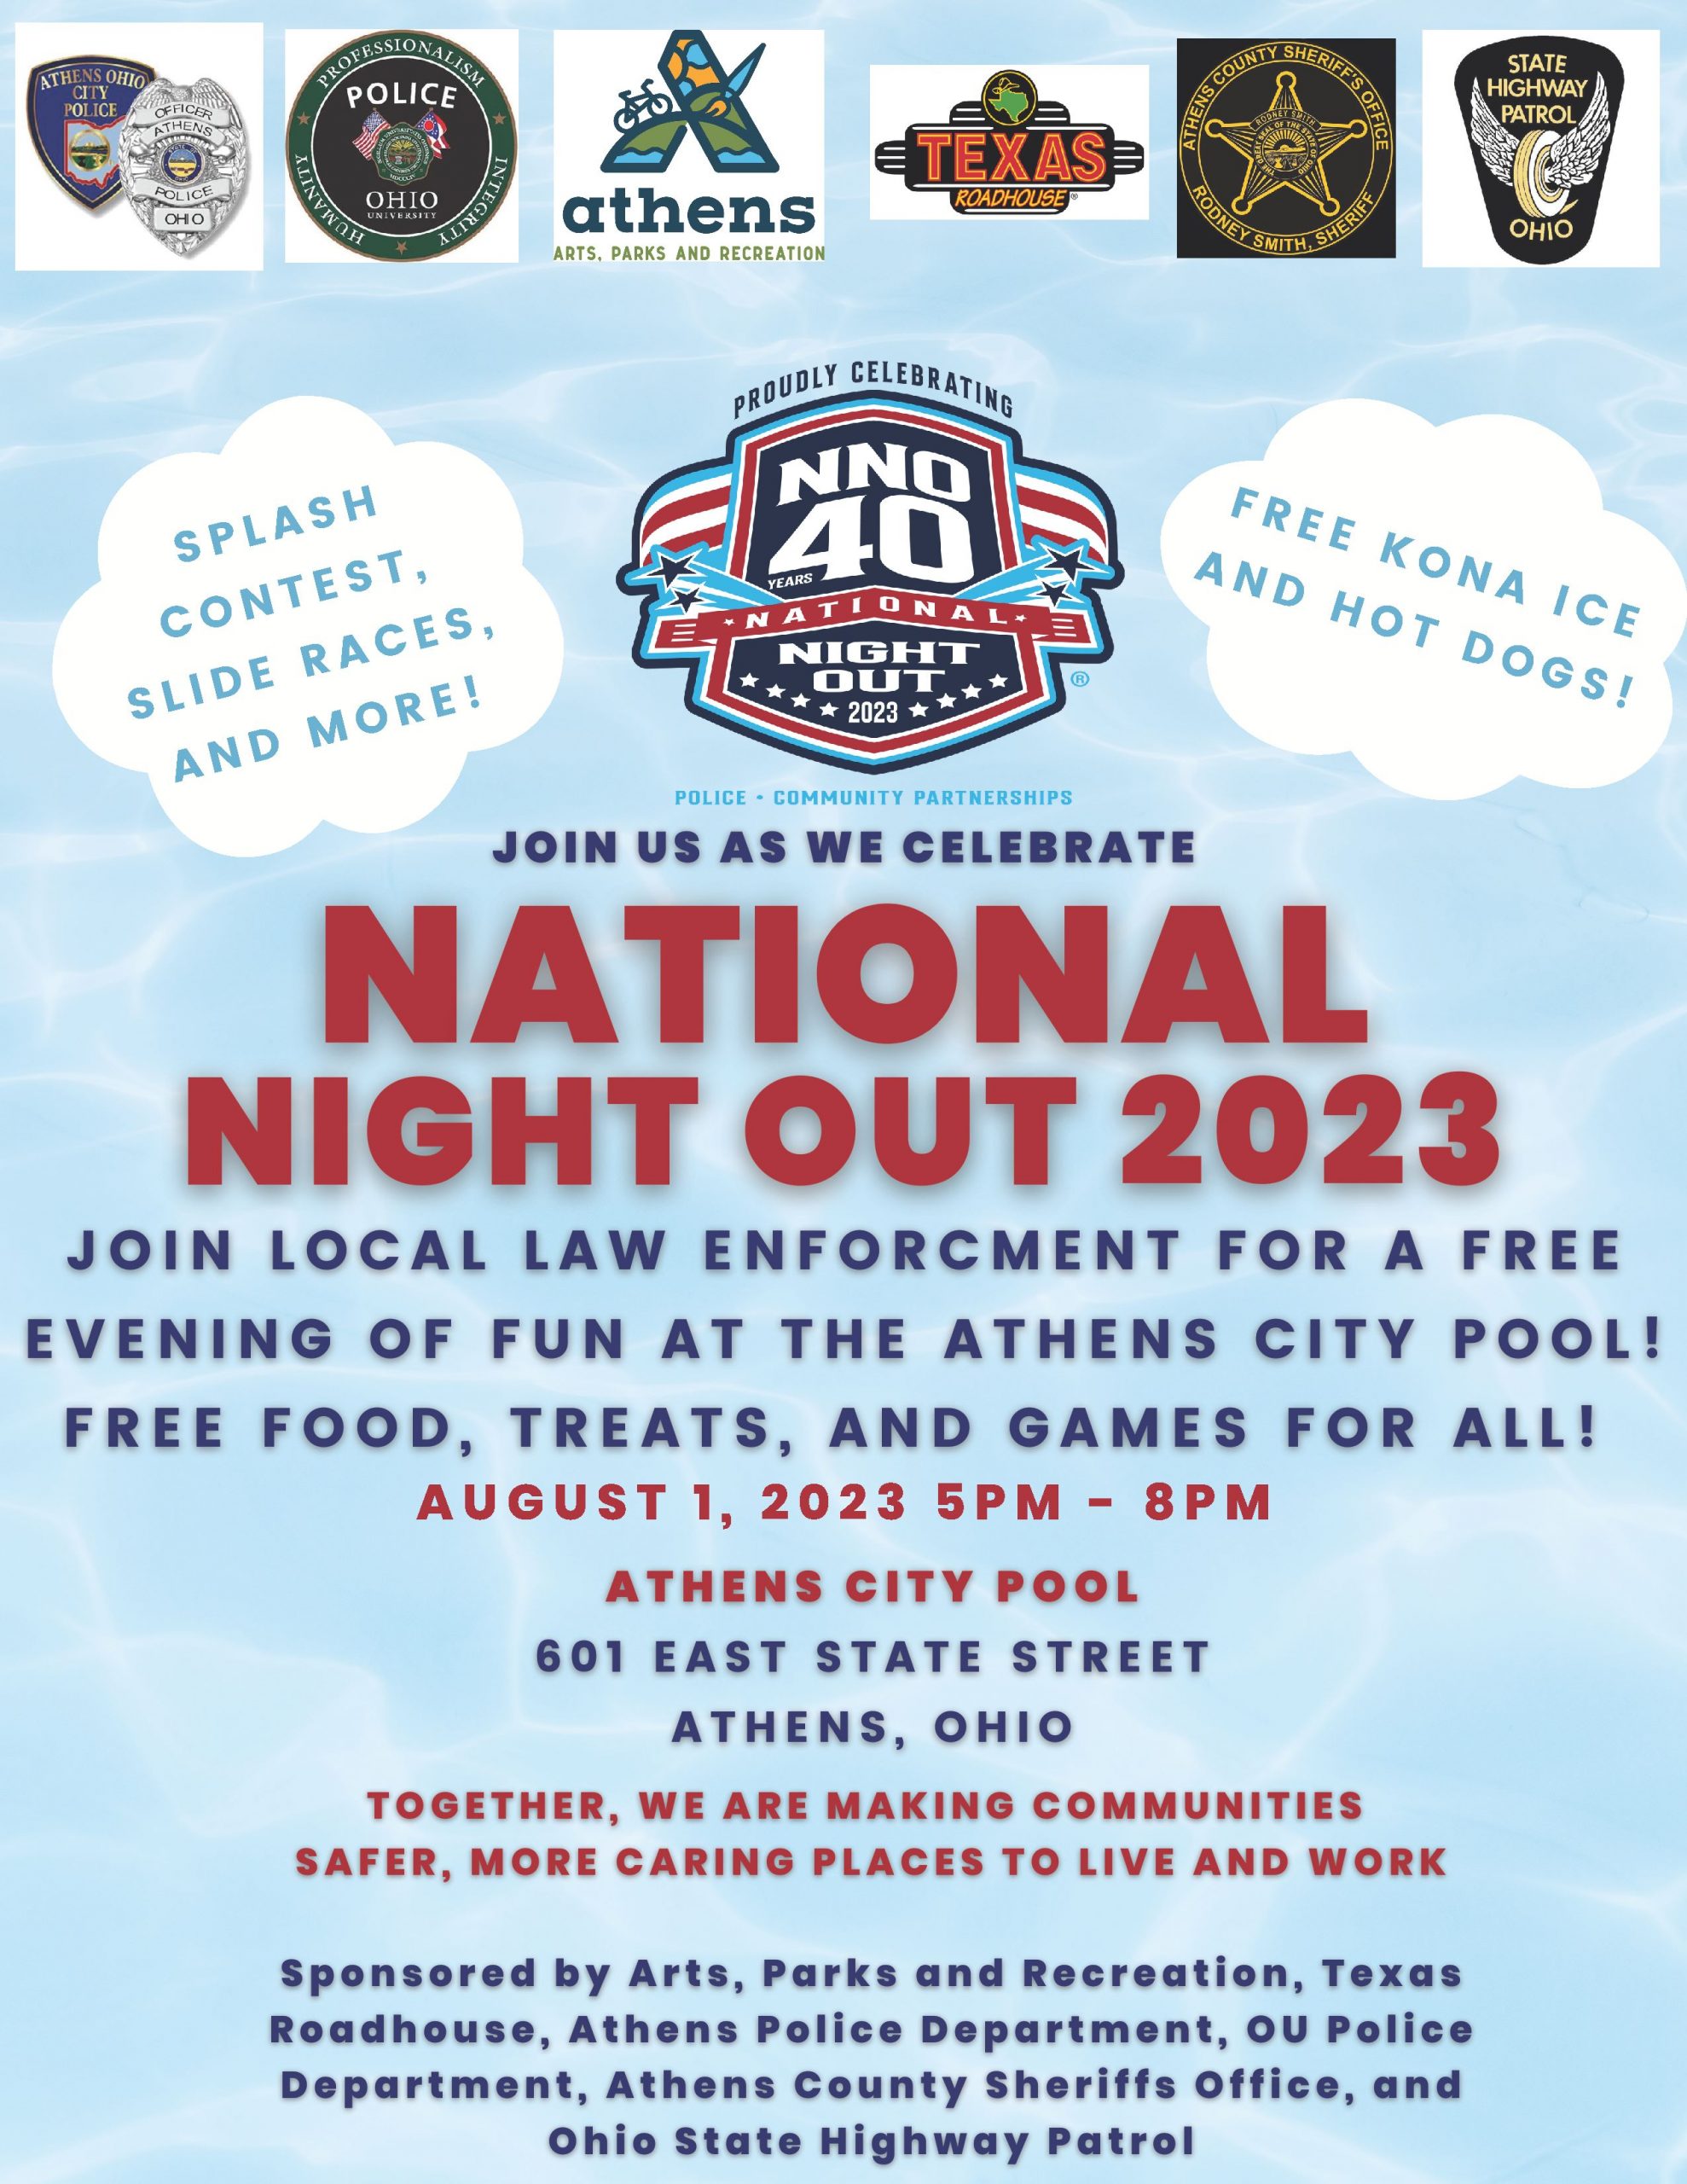 A flyer reading NationalNight Out 2023 Join Local Law Enforcement for a free evening of fun at the Athens City Pool. Free food, treats, and games for all. August 1, 2023 5 p.m. - 8 p.m. The text is against a background that looks like the surface of water.